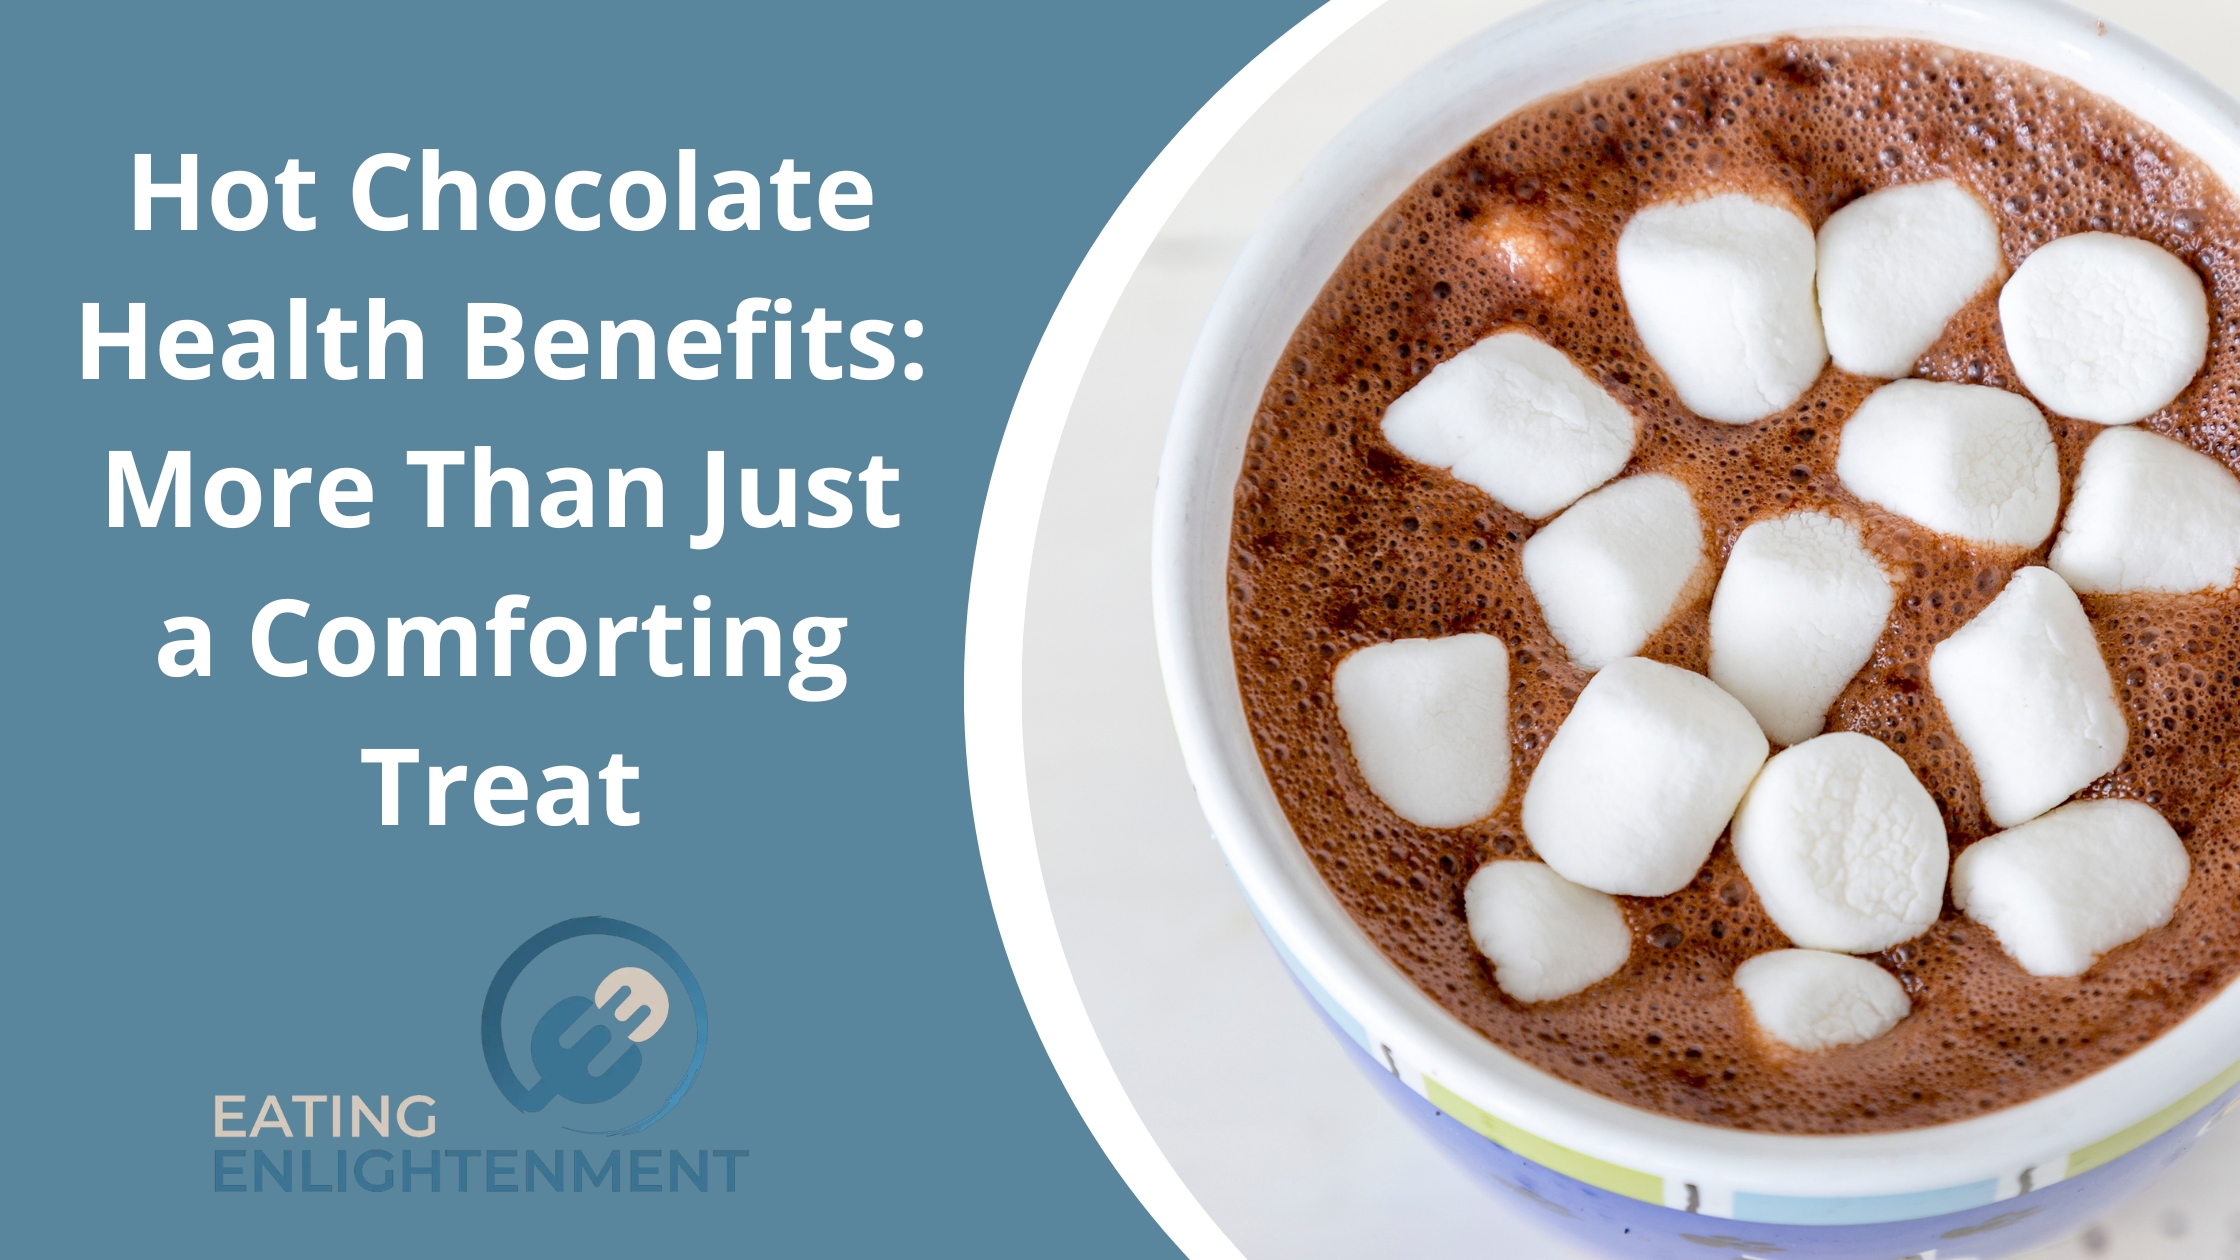 Hot Chocolate Health Benefits: More Than Just a Comforting Treat